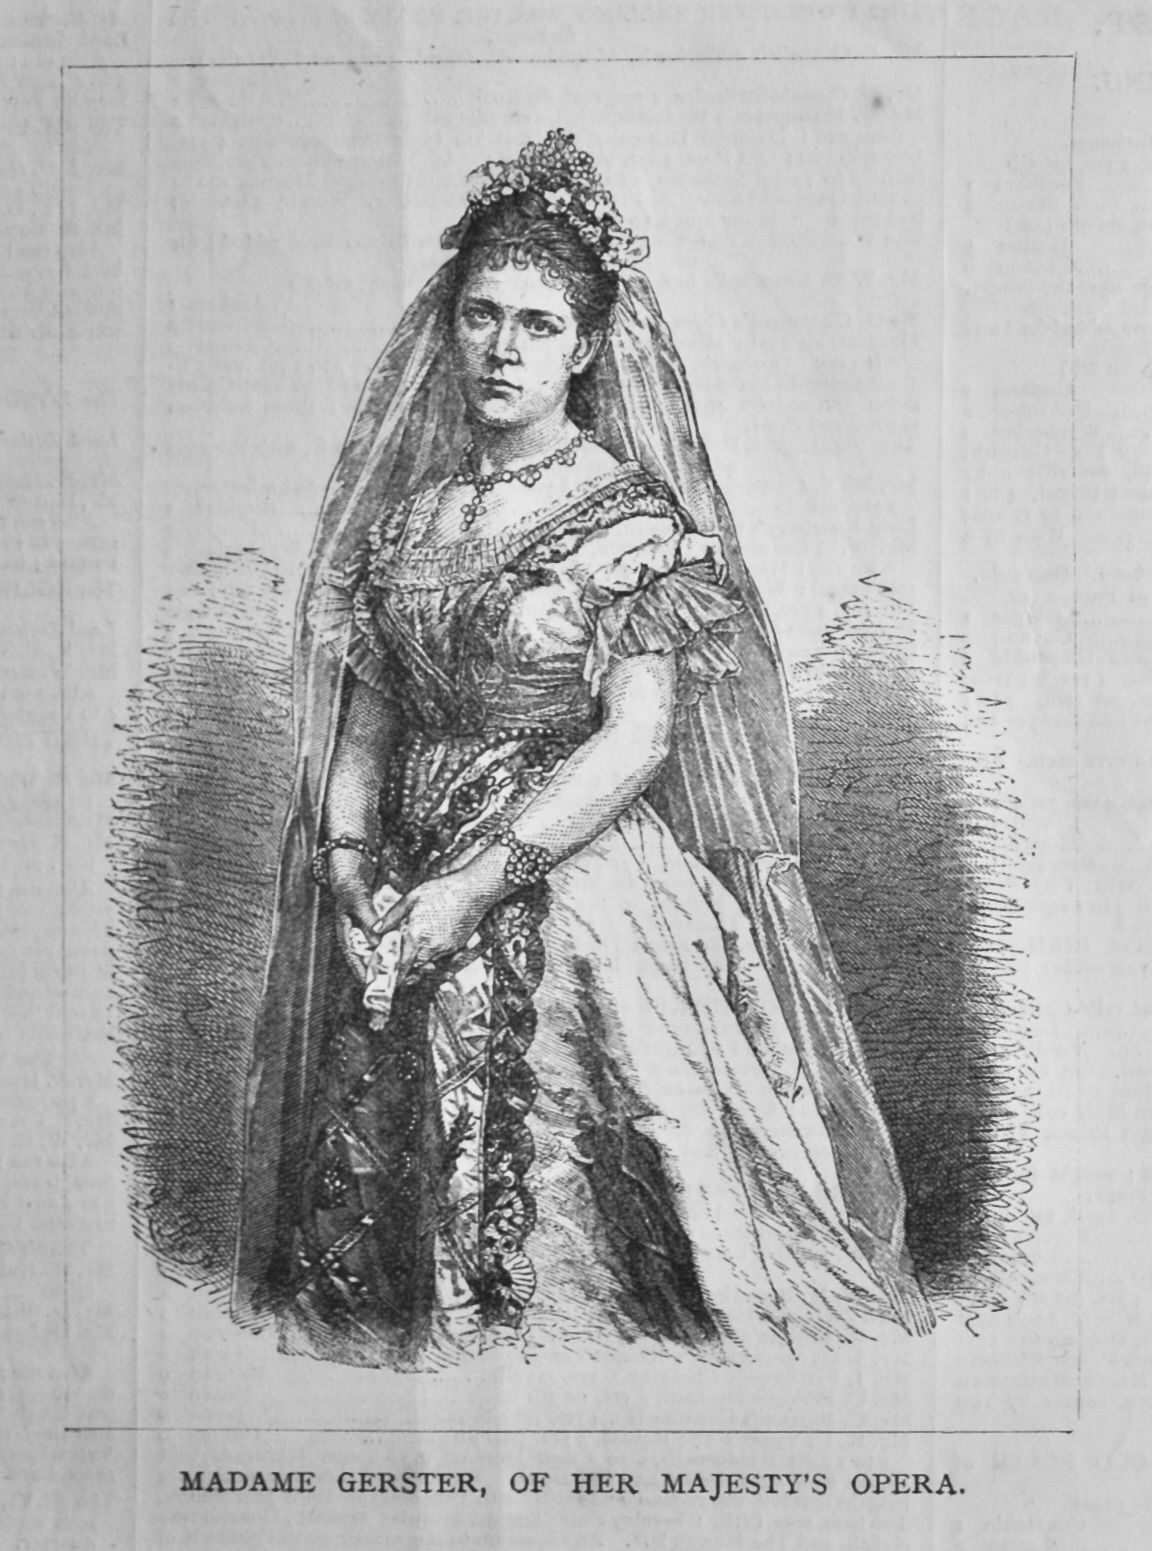 Madame Gerster, of Her Majesty's Opera. 1878.